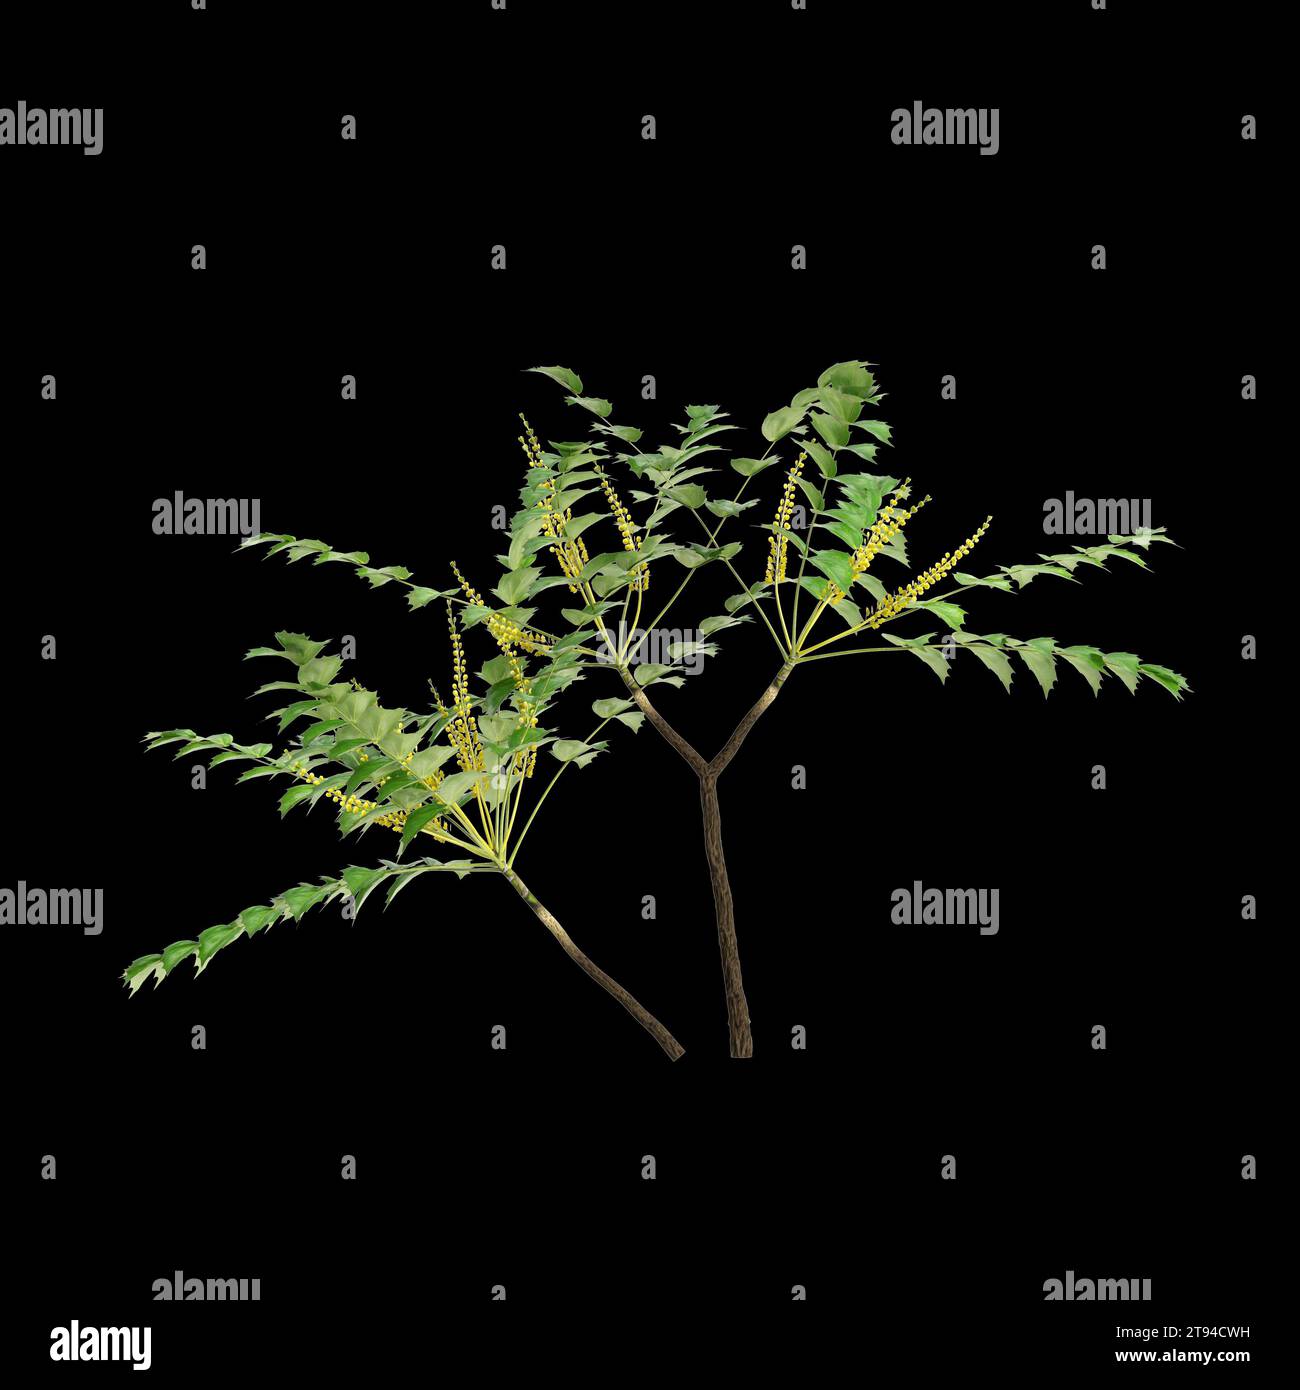 3d illustration of Mahonia japonica tree isolated on black background Stock Photo